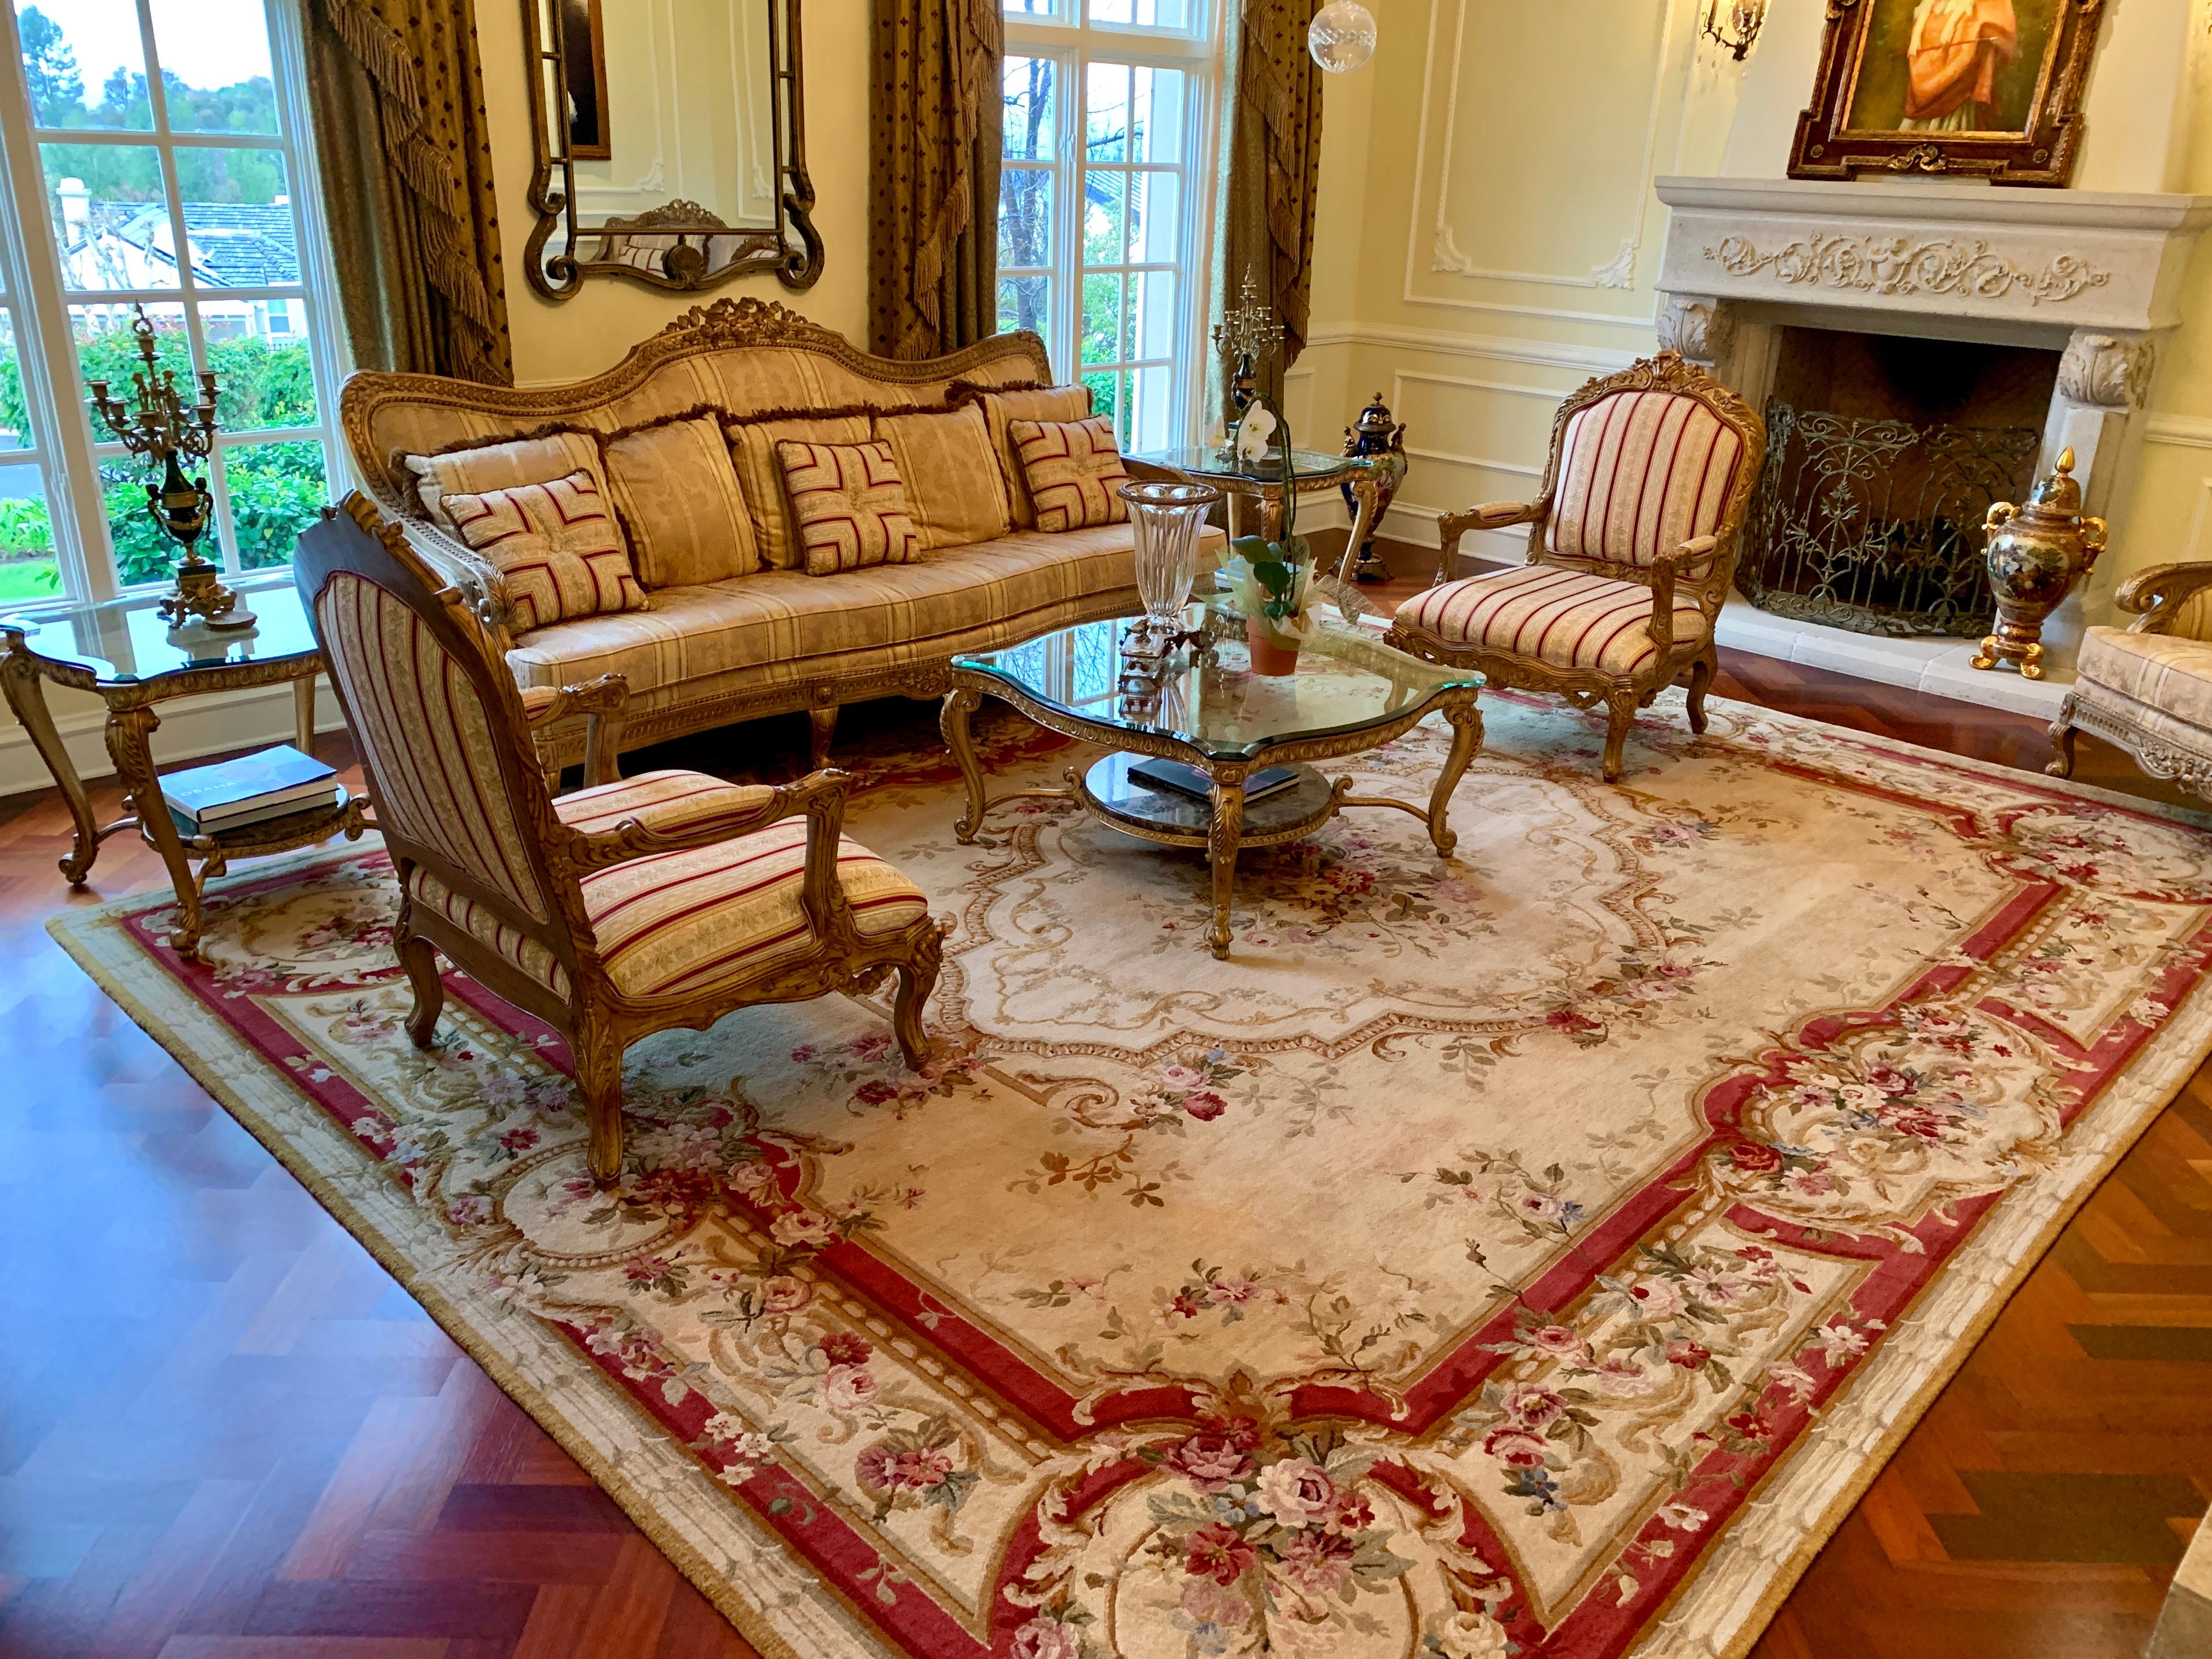 Very palatial, handmade, approximately 12’ x 15’, grand French Aubusson or Savonnerie style, estate wool rug with an ivory color background features rich floral toned bouquets and sprays of roses, as well as multicolored scrolling acanthus leaves